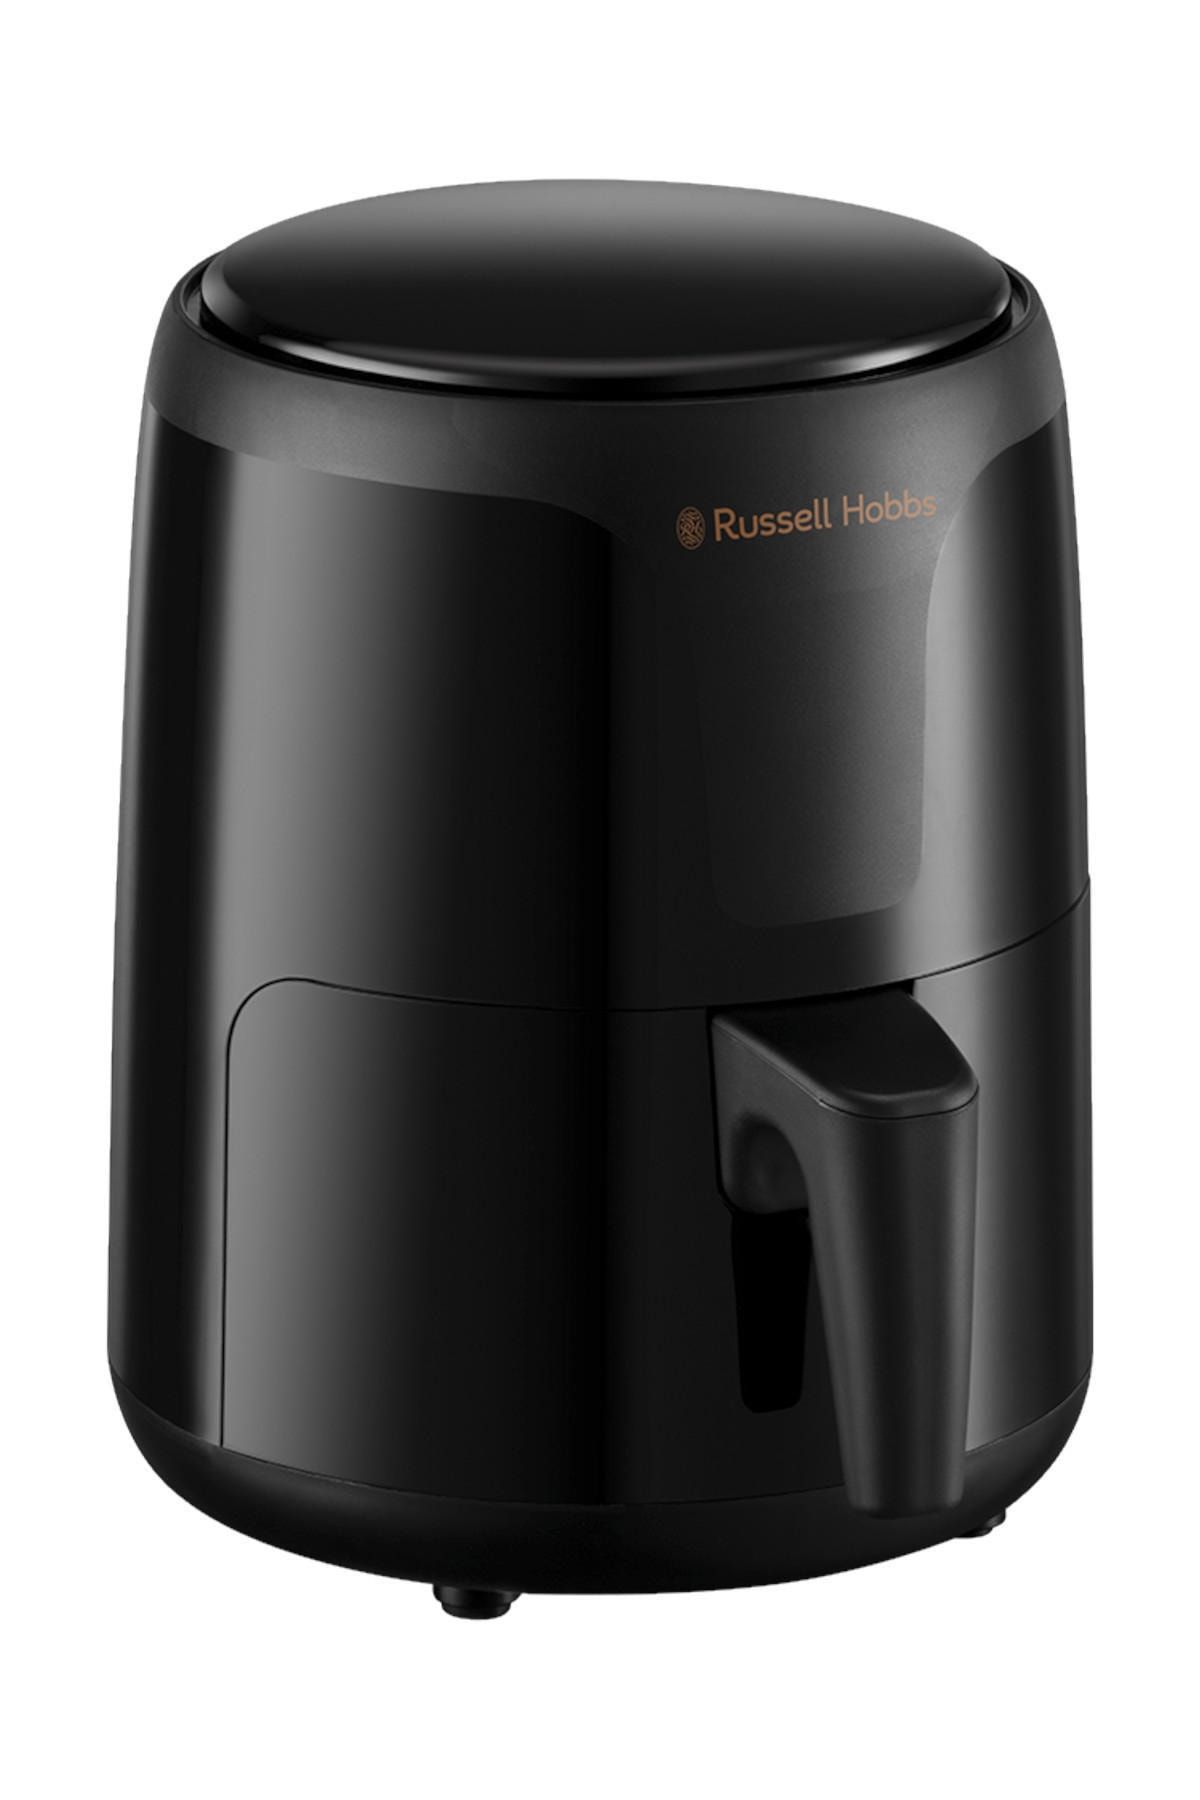 Russell Hobbs Satisfry Small 1.8 Litre Airfryer 26500-56 Fritöz